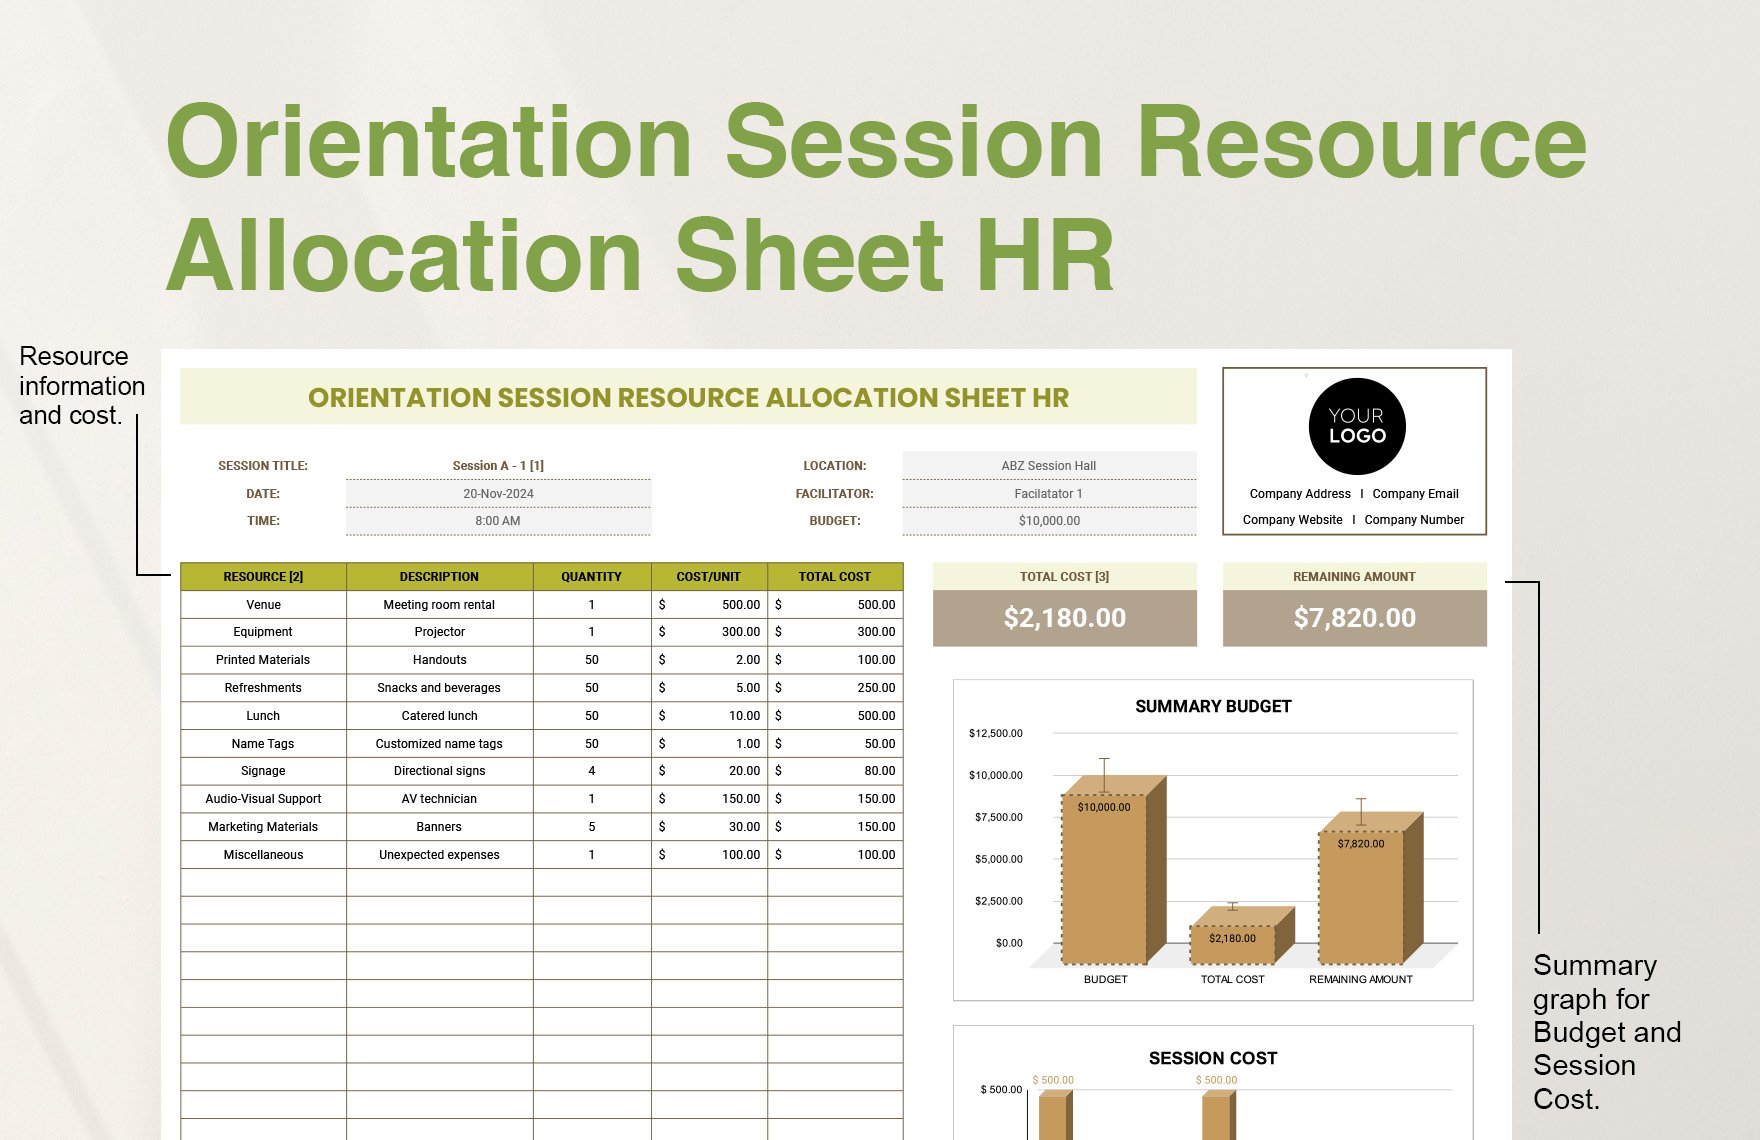 Orientation Session Resource Allocation Sheet HR Template